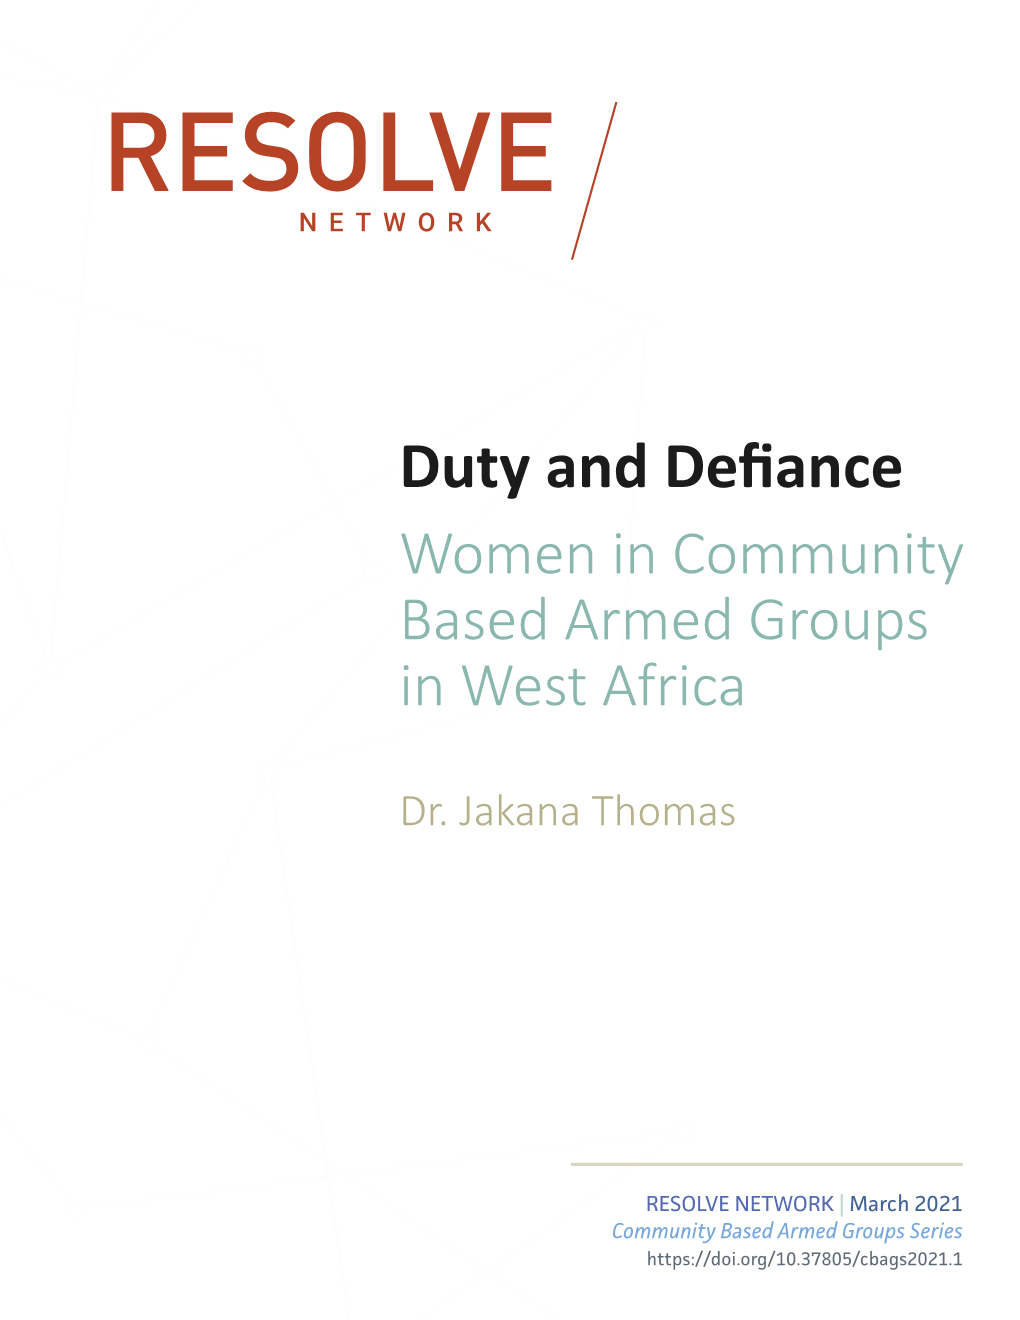 DUTY and DEFIANCE 1 Offer Women Opportunities to Advance Community Welfare, Exercise Political Power and Transcend Their Proscribed Domestic Roles